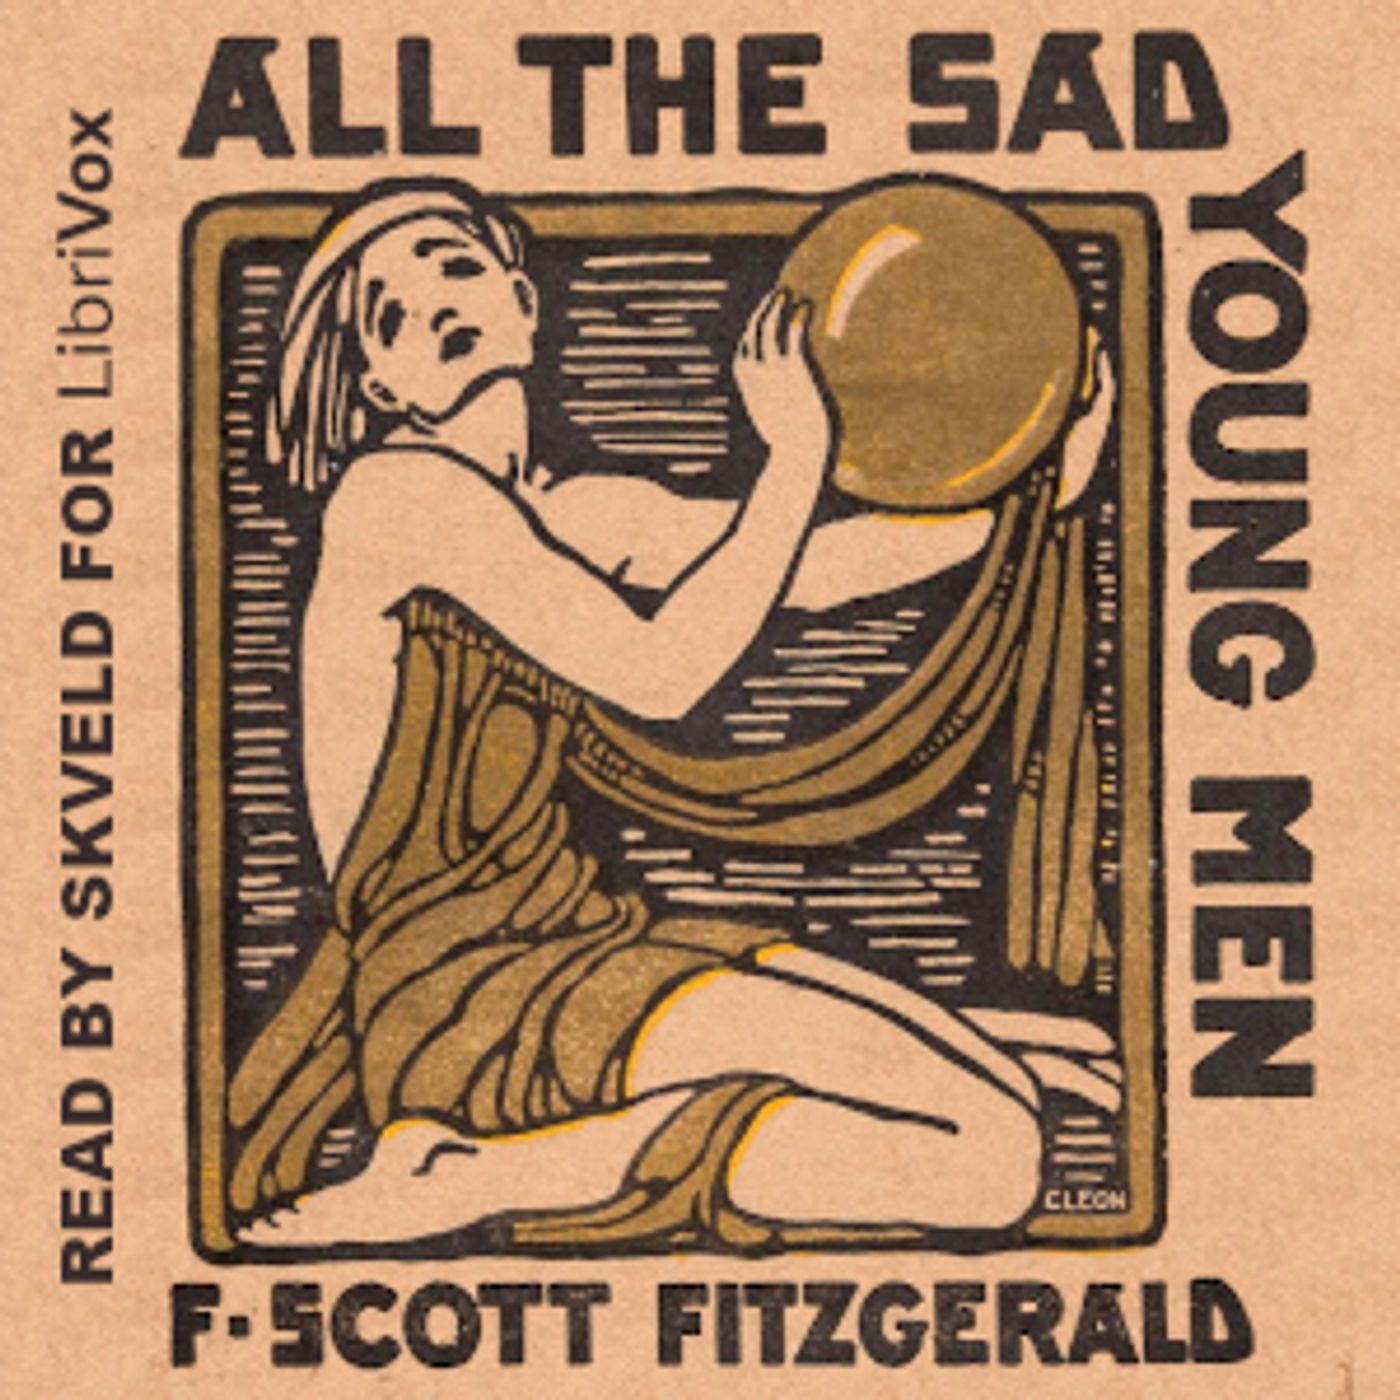 All the Sad Young Men by F. Scott Fitzgerald (1896 – 1940)